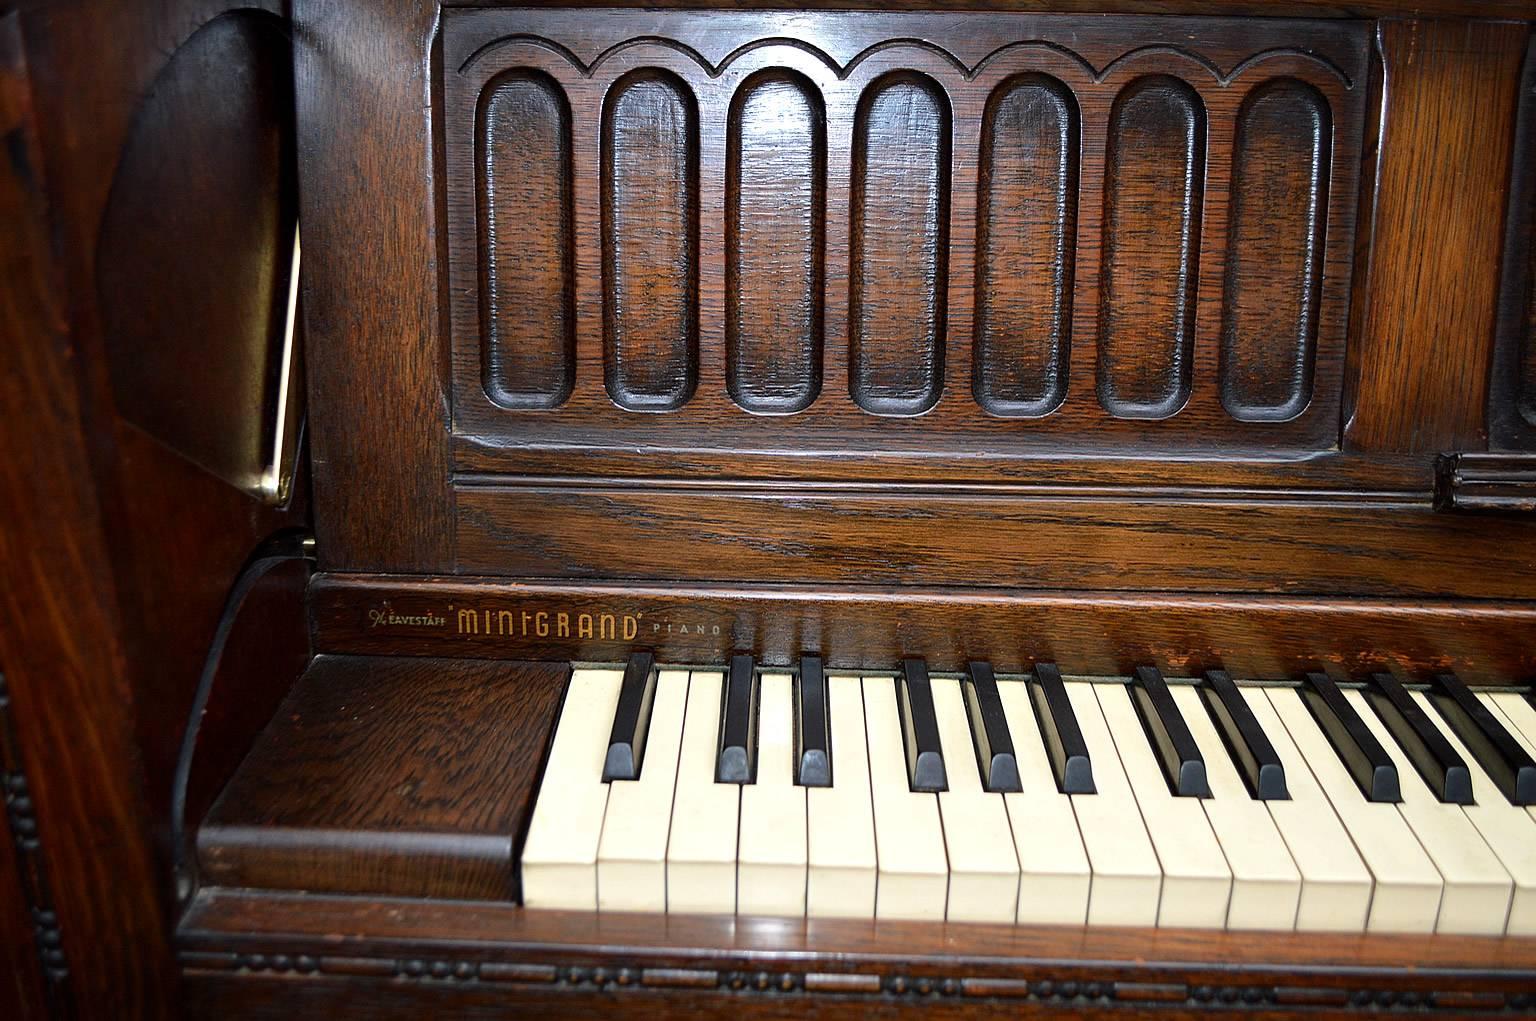 This is a beautifully made oak cased piano, made in the Gothic Revival style. The piano comes complete with matching oak stool. Eavestaff made reliable and quality sounding pianos and this piano is a perfect example of their high build quality. The